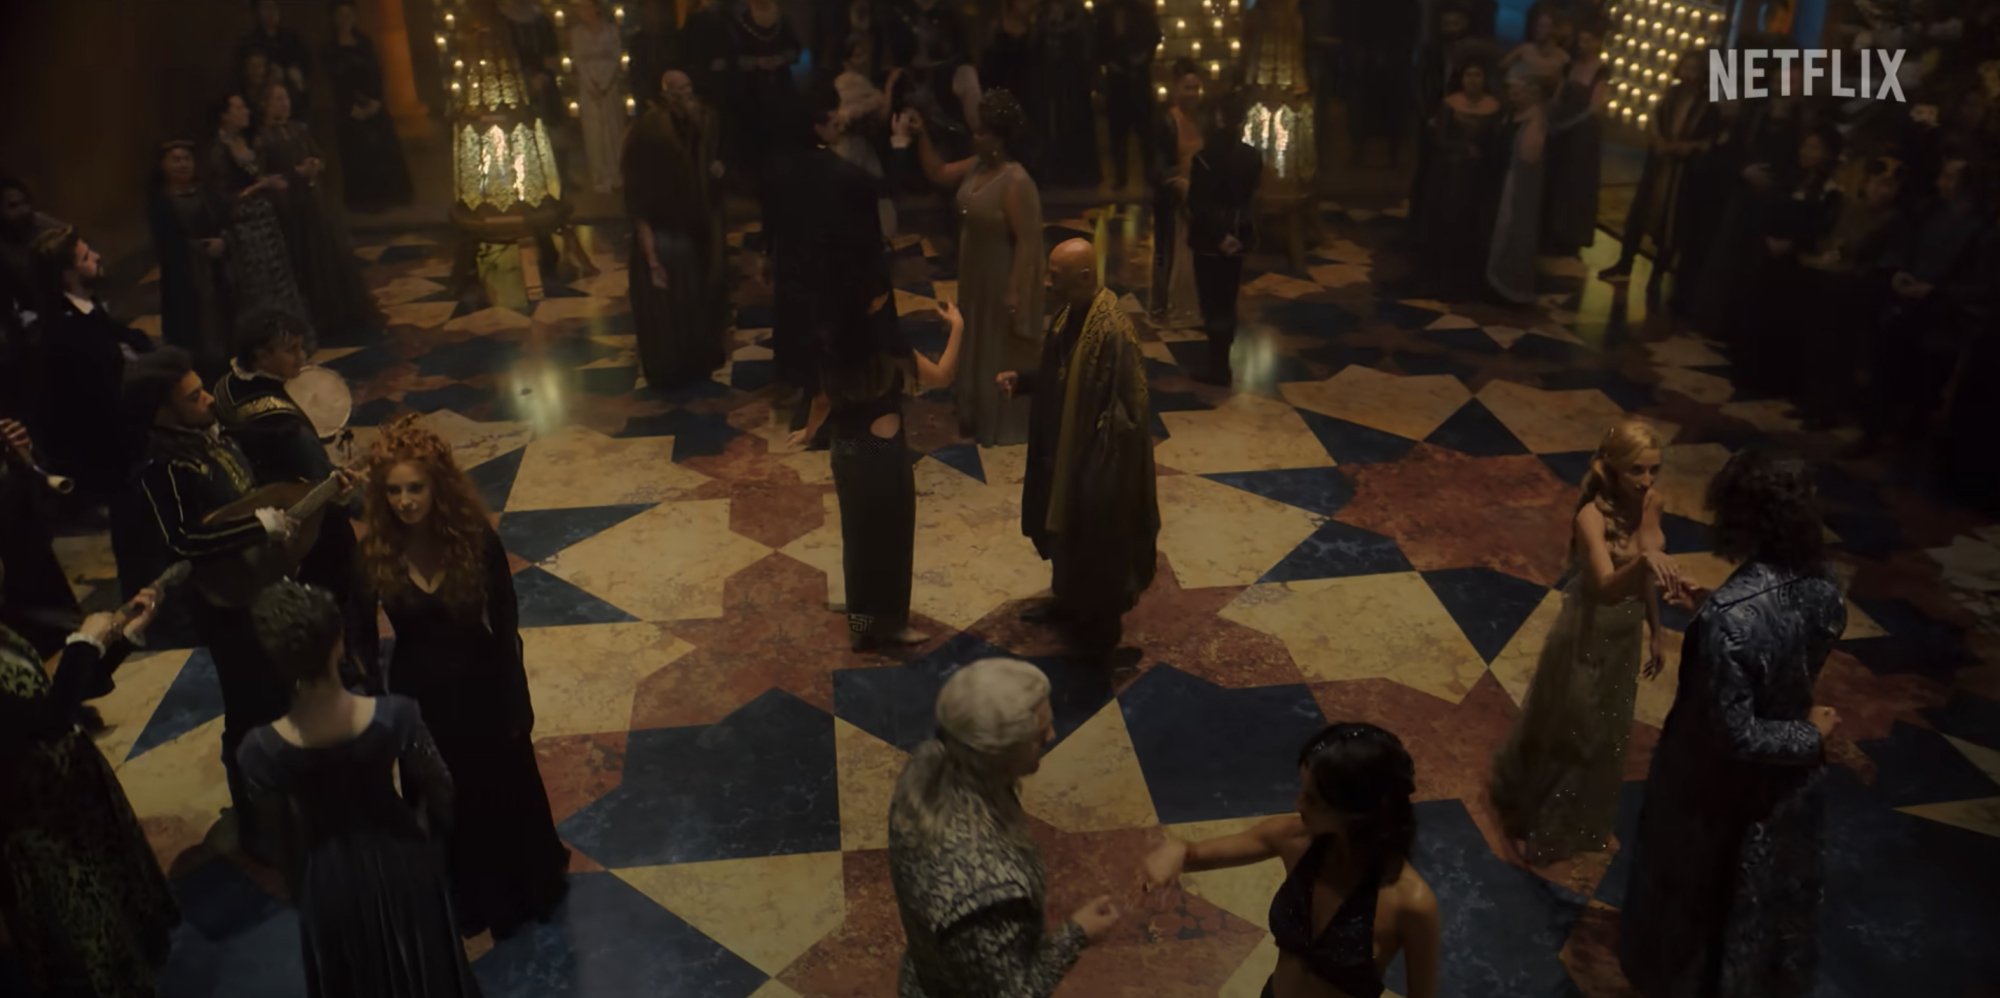 A ball scene in the TV show "The Witcher"